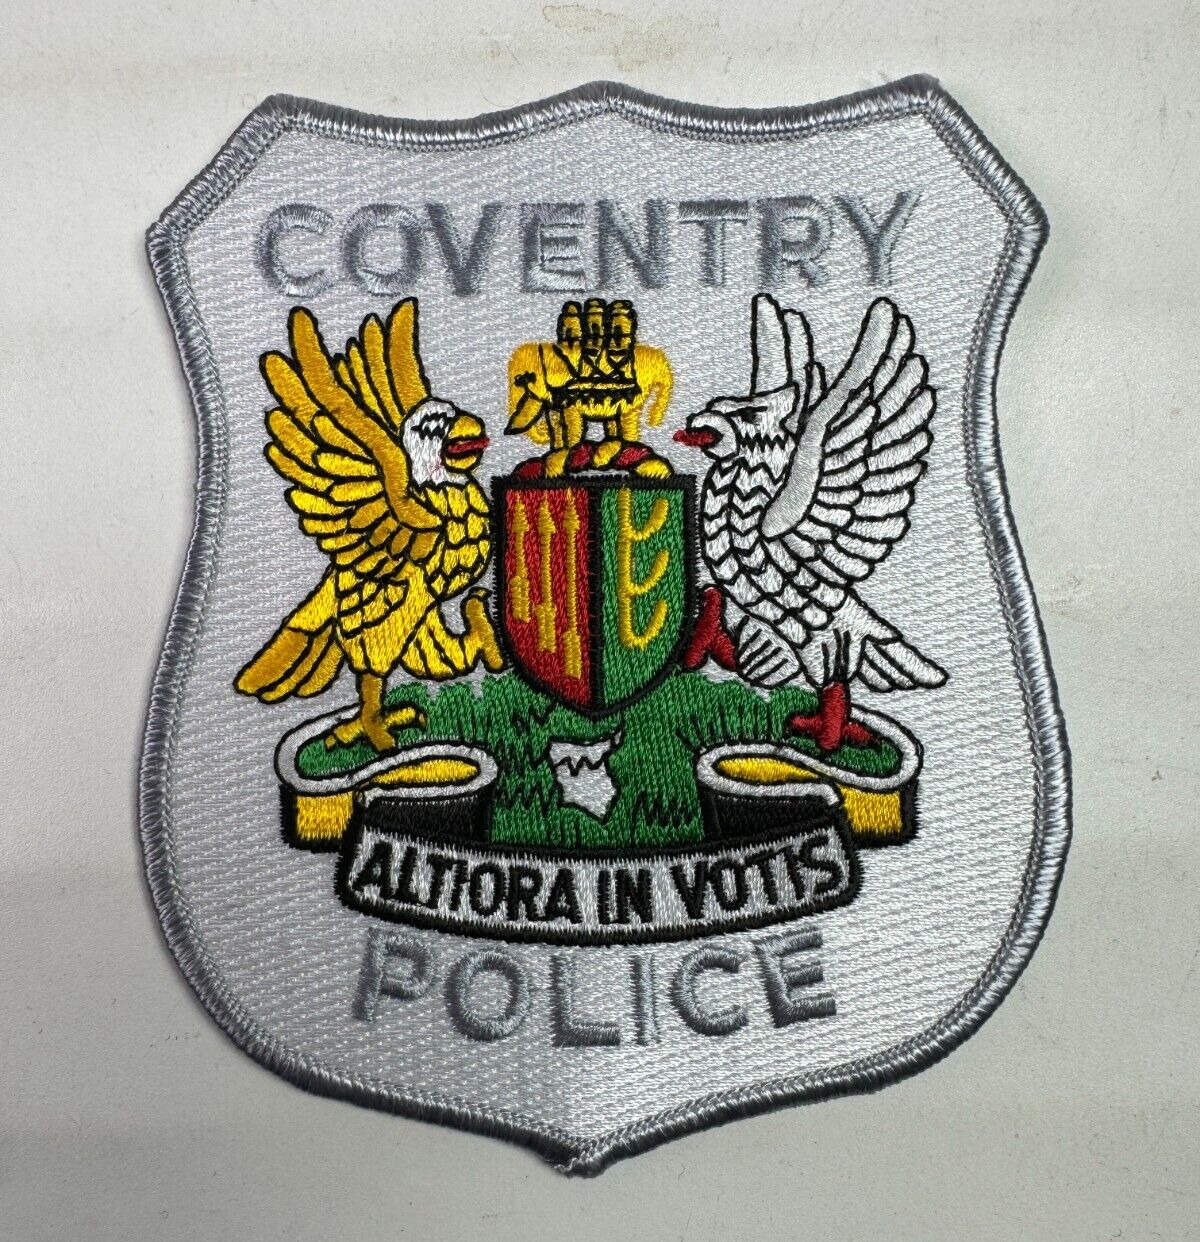 Coventry Police Connecticut CT Patch B6